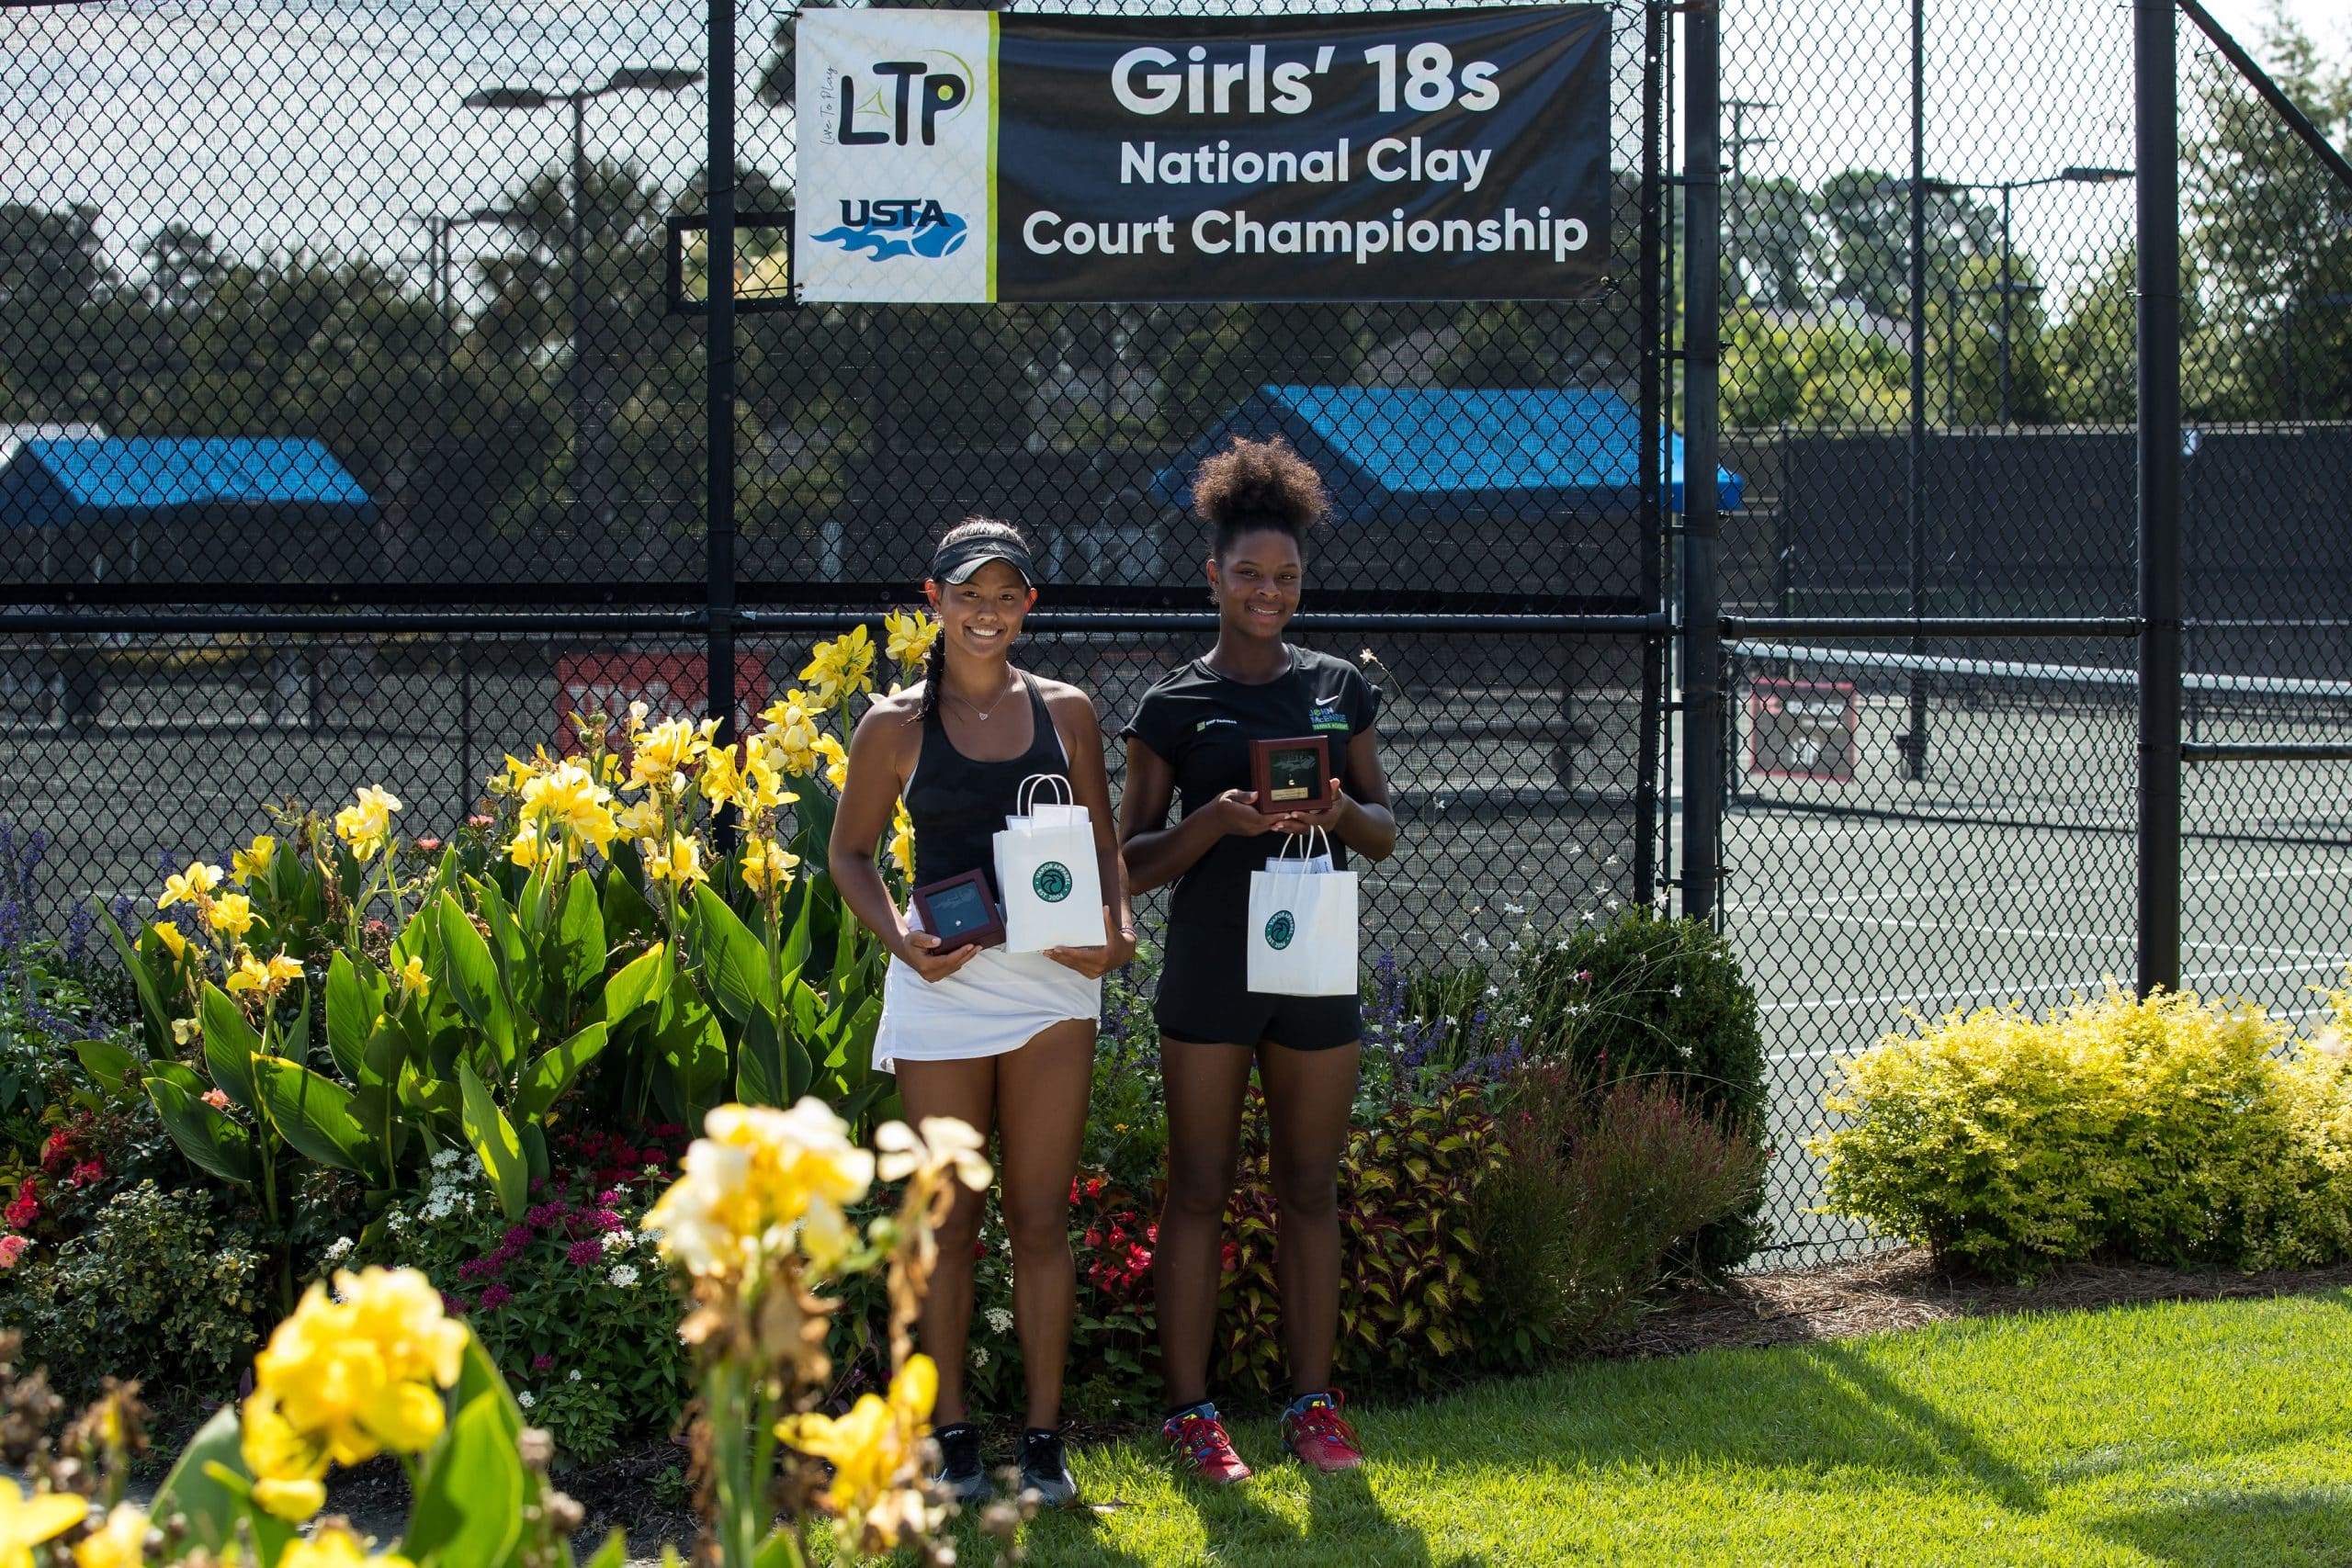 Two Florida Players Crowned USTA National Clay Court Champions USTA